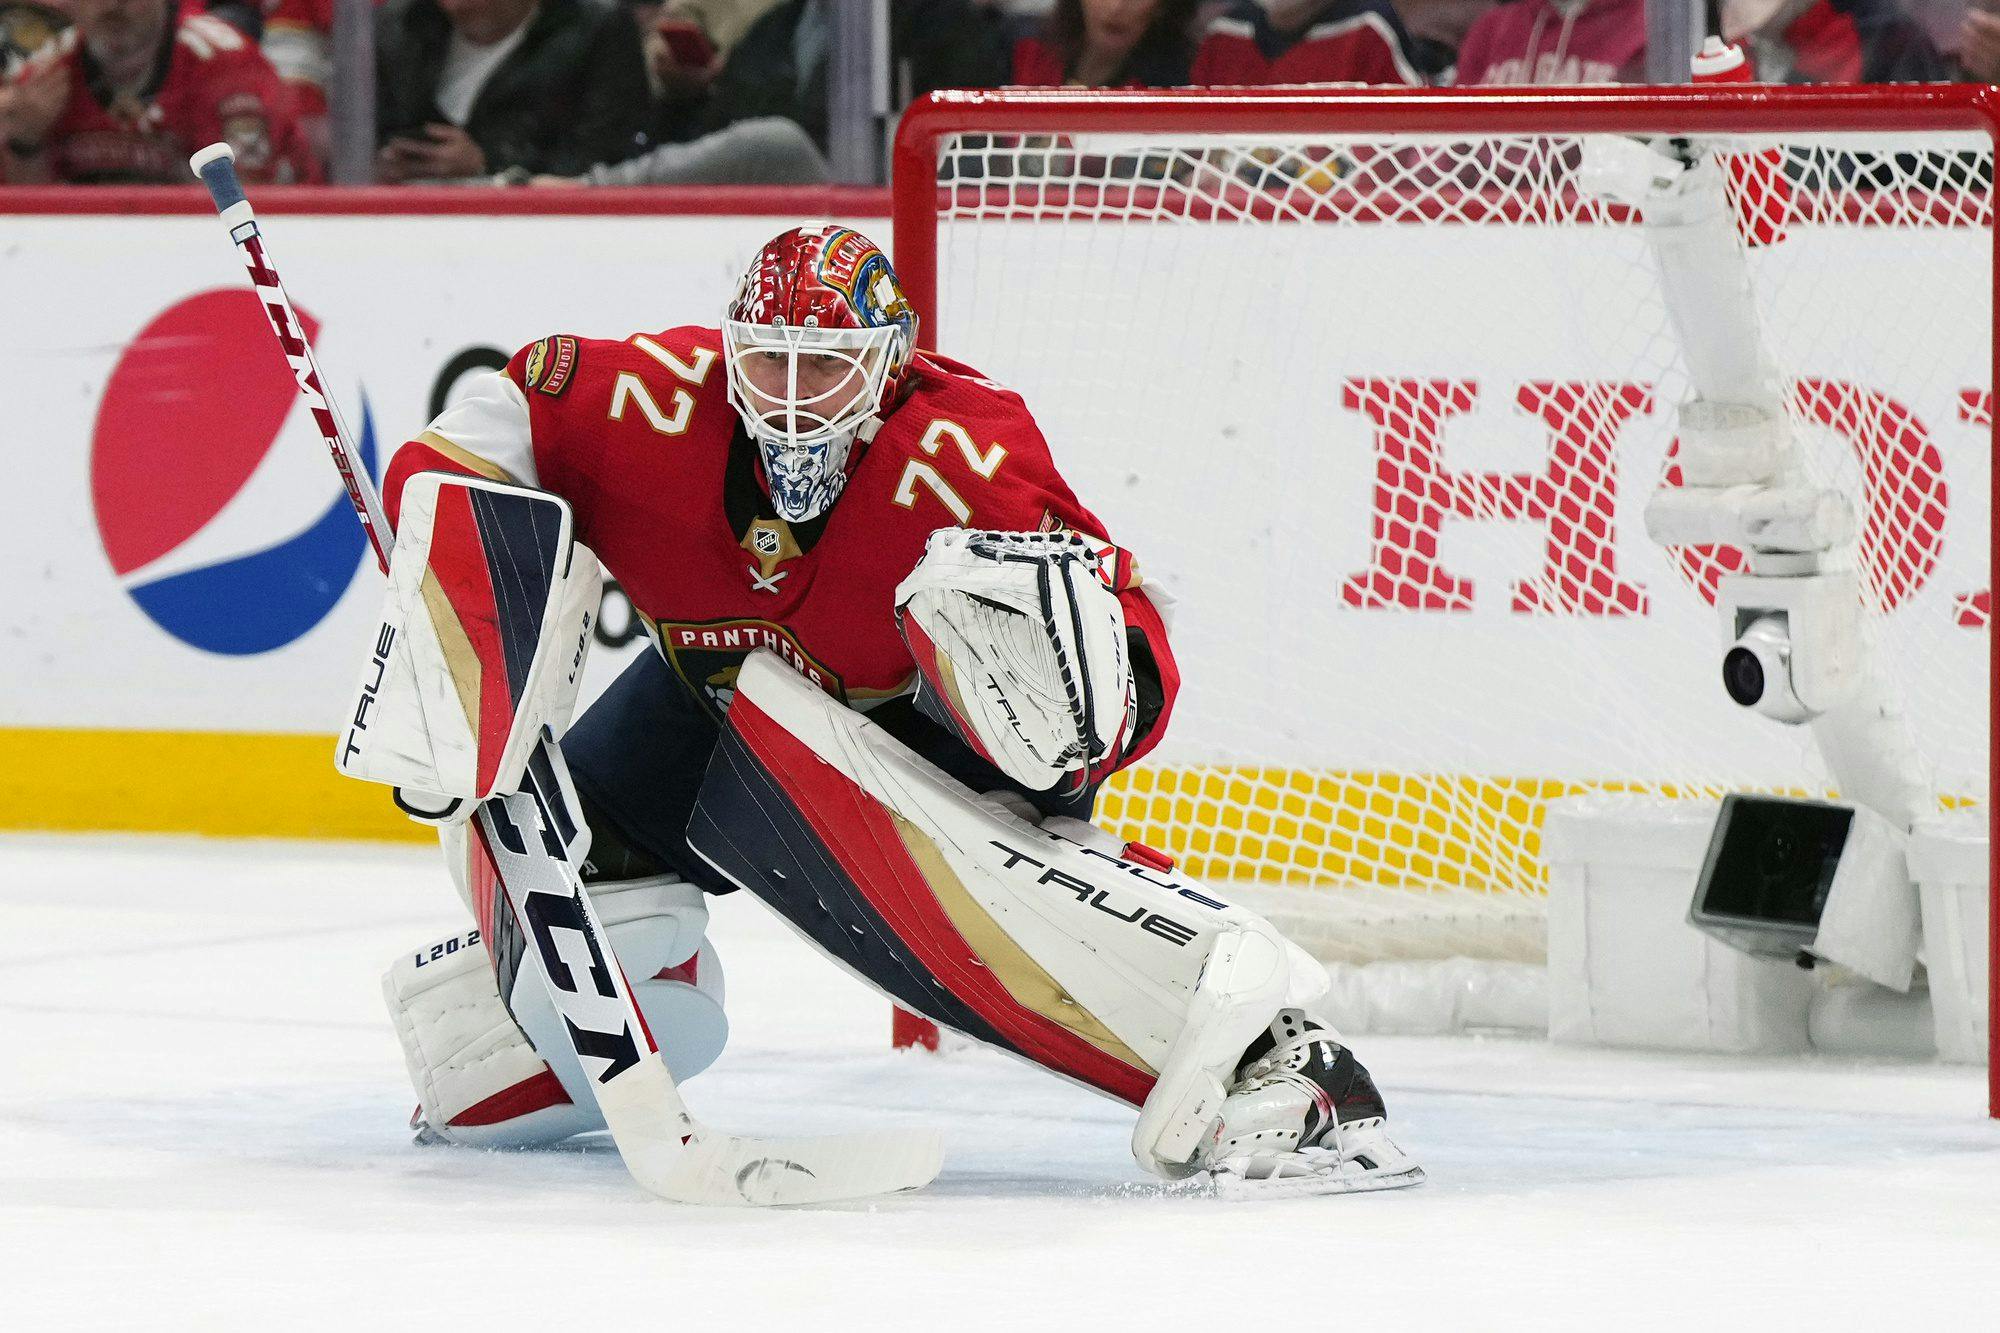 Betway starting goalie bet of the day: Bet on odds on Conn Smythe favorite Sergei Bobrovsky to continue strong play in game four